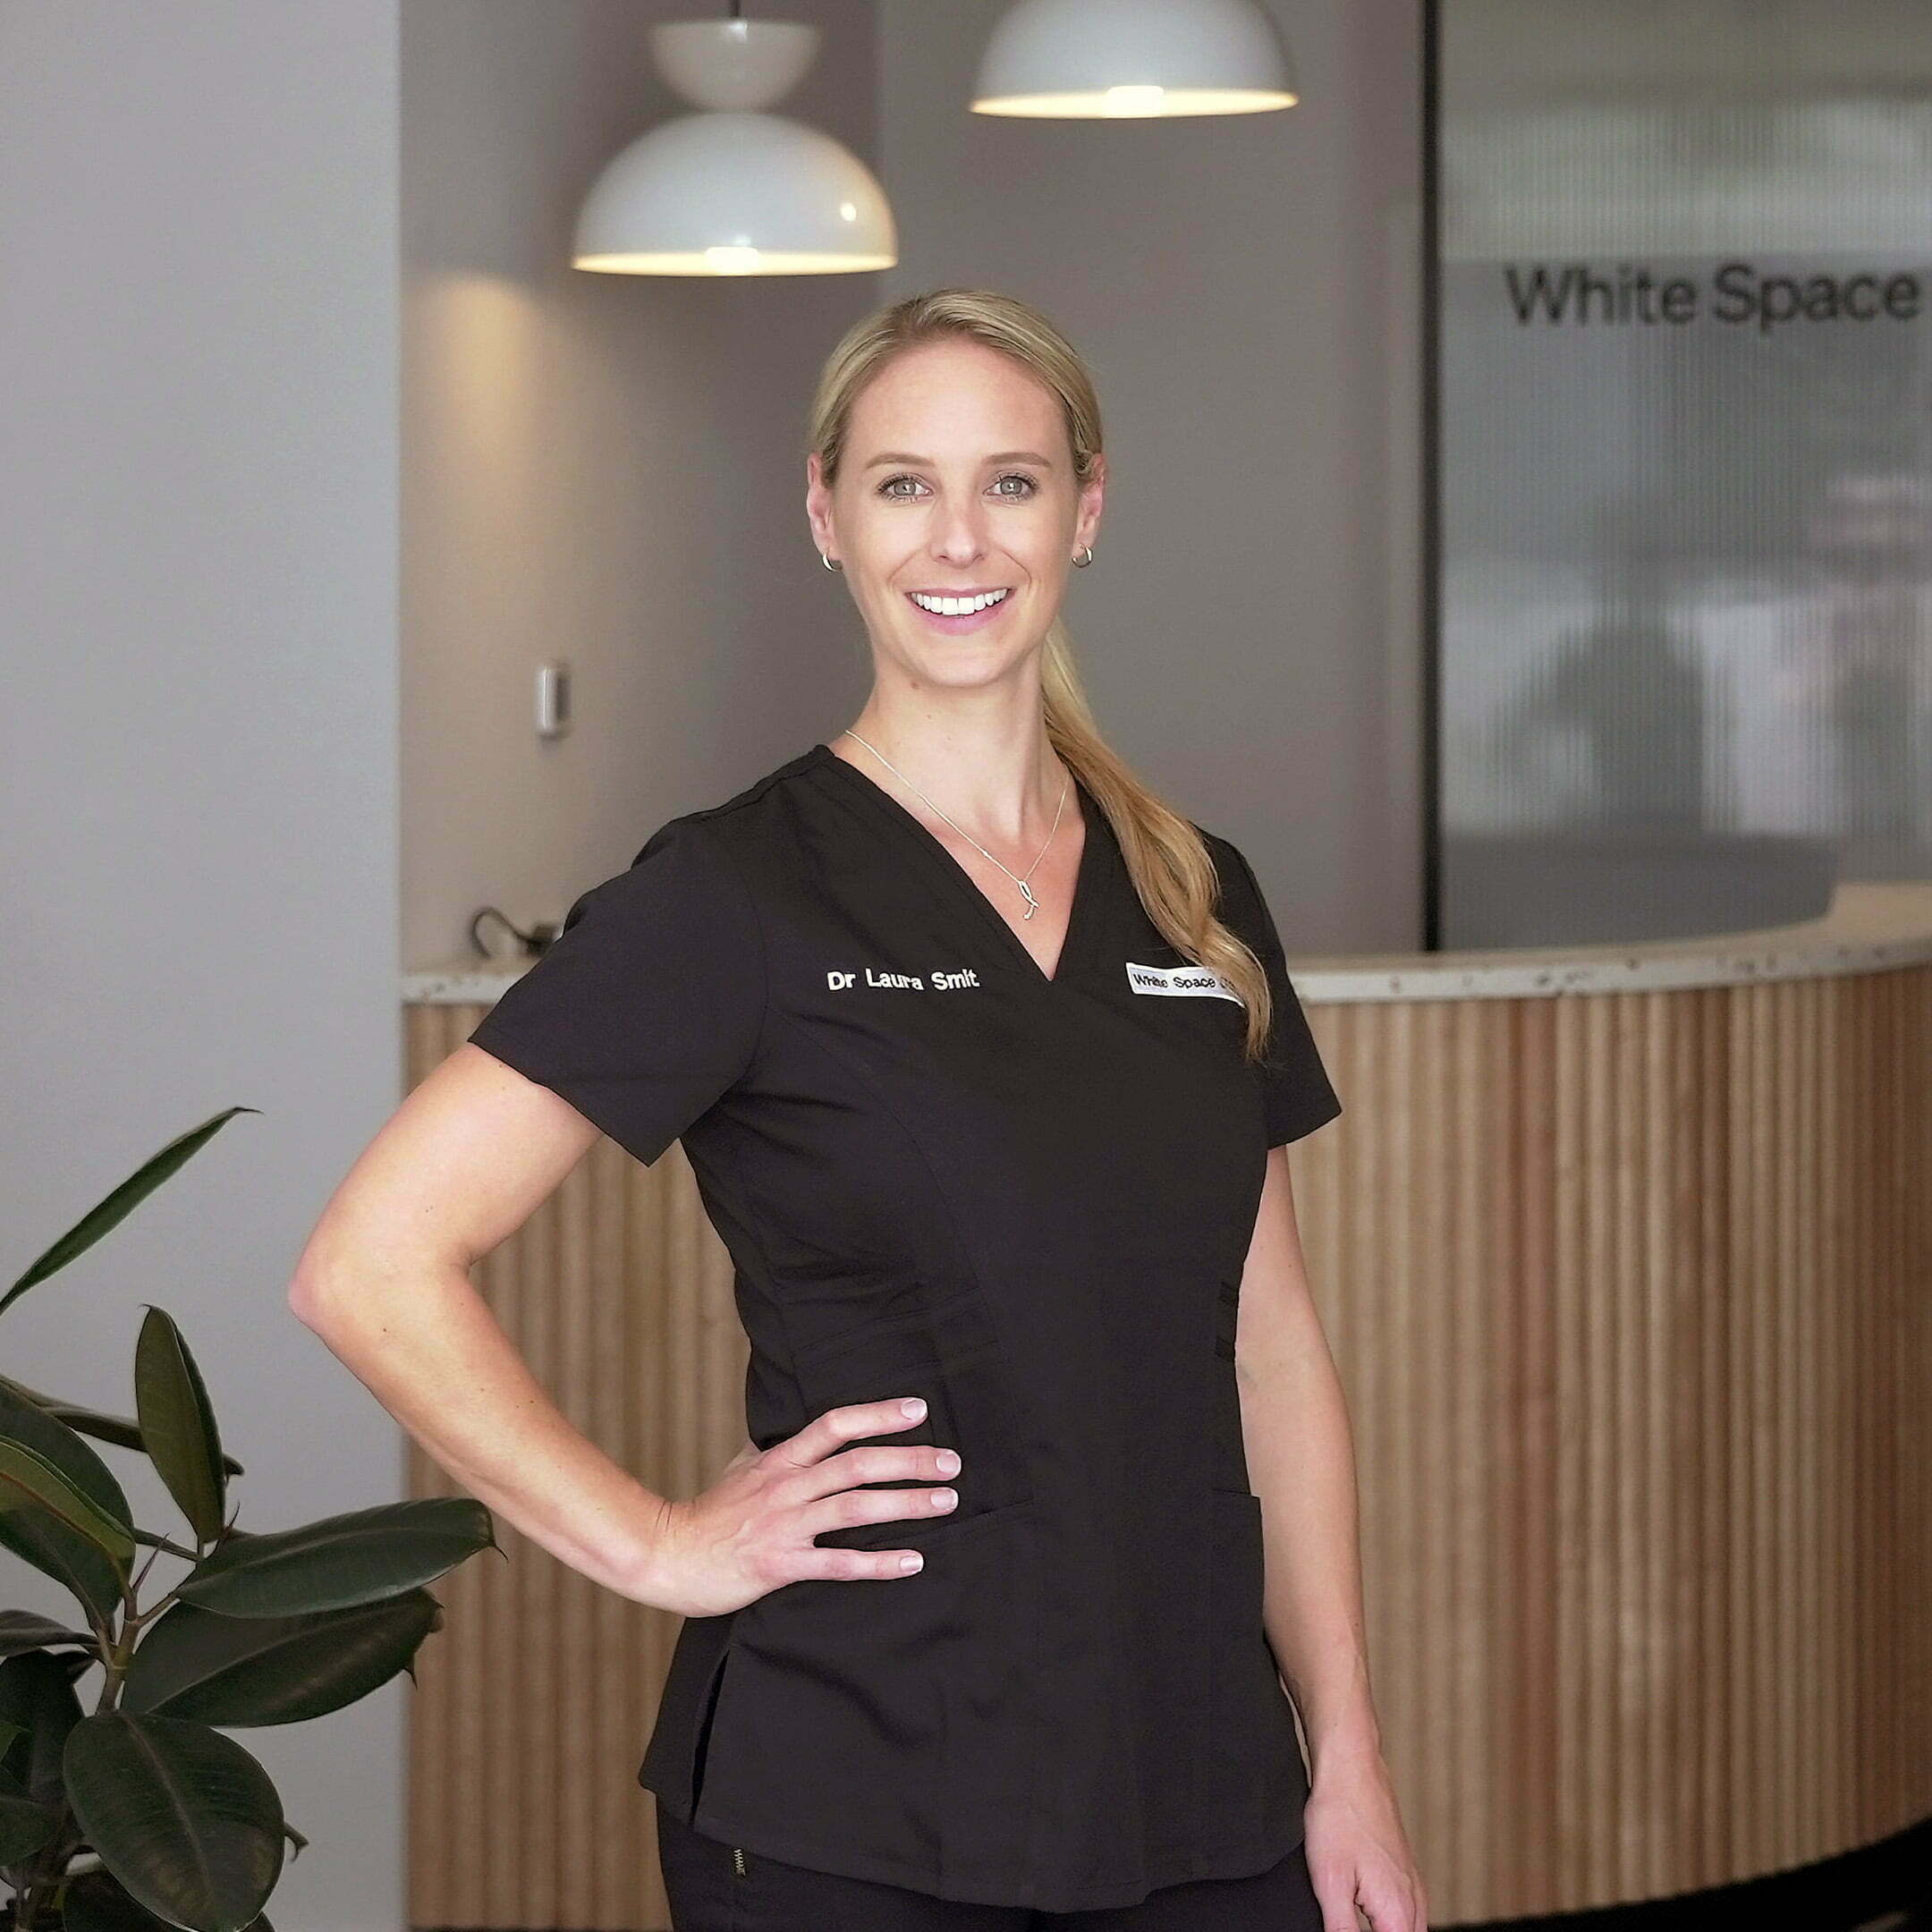 Dr Laura Smit at White Space Dental